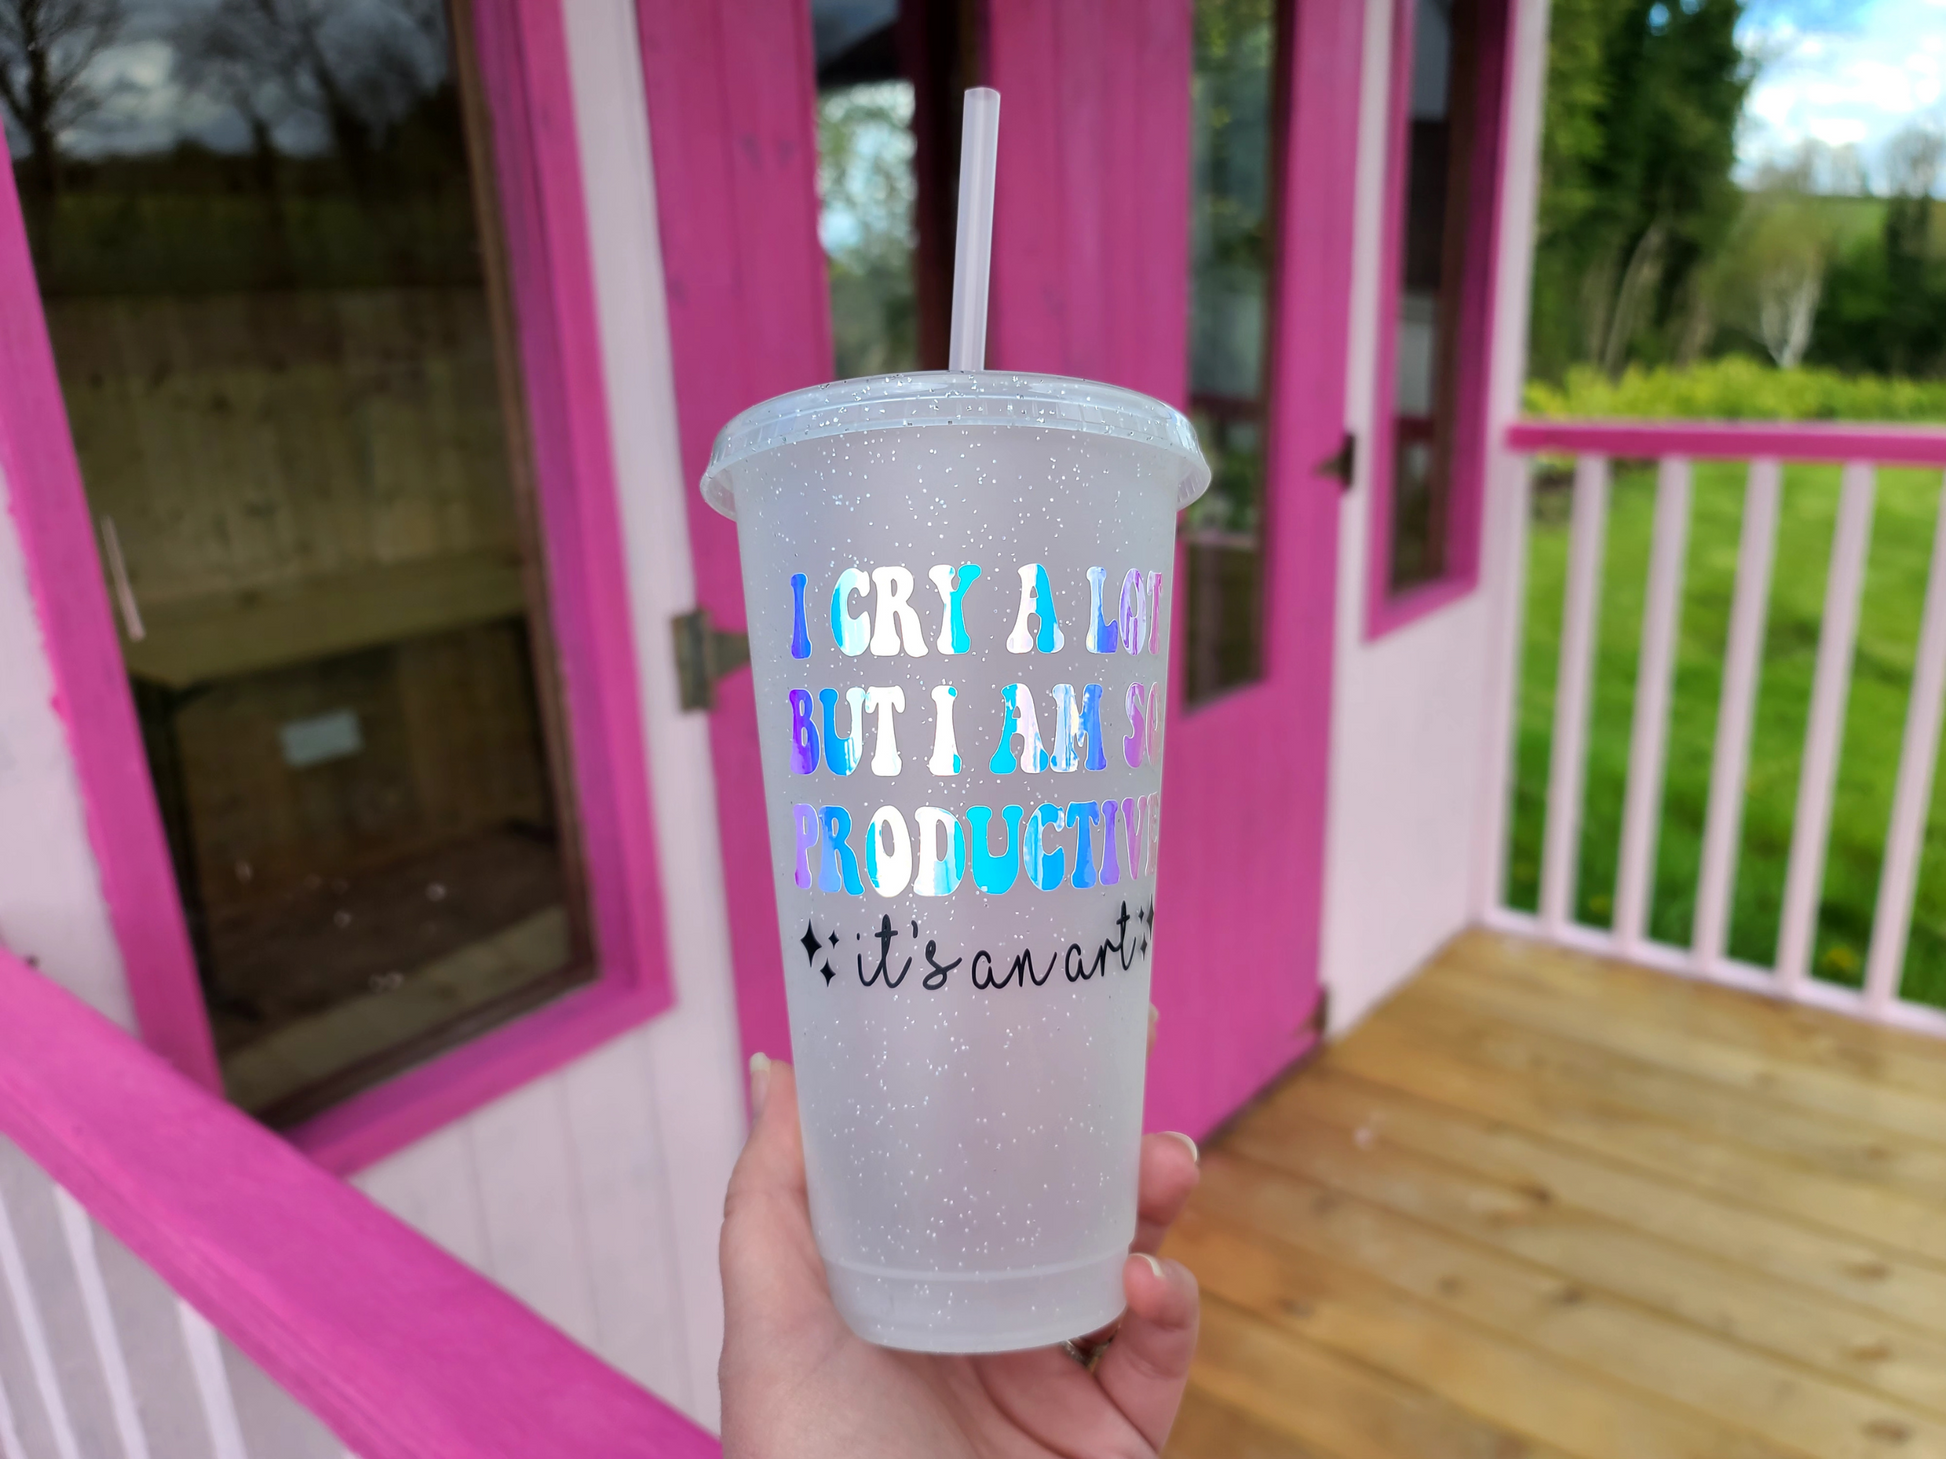 A Glitter tumbler with The Text I Cry A Lot But I am So Productive Lyrics From The Tortured Poets Department TTPD. This is a 24oz cup which is perfect for fans of Taylor Swift. Made and sold by Krissi's Creations.